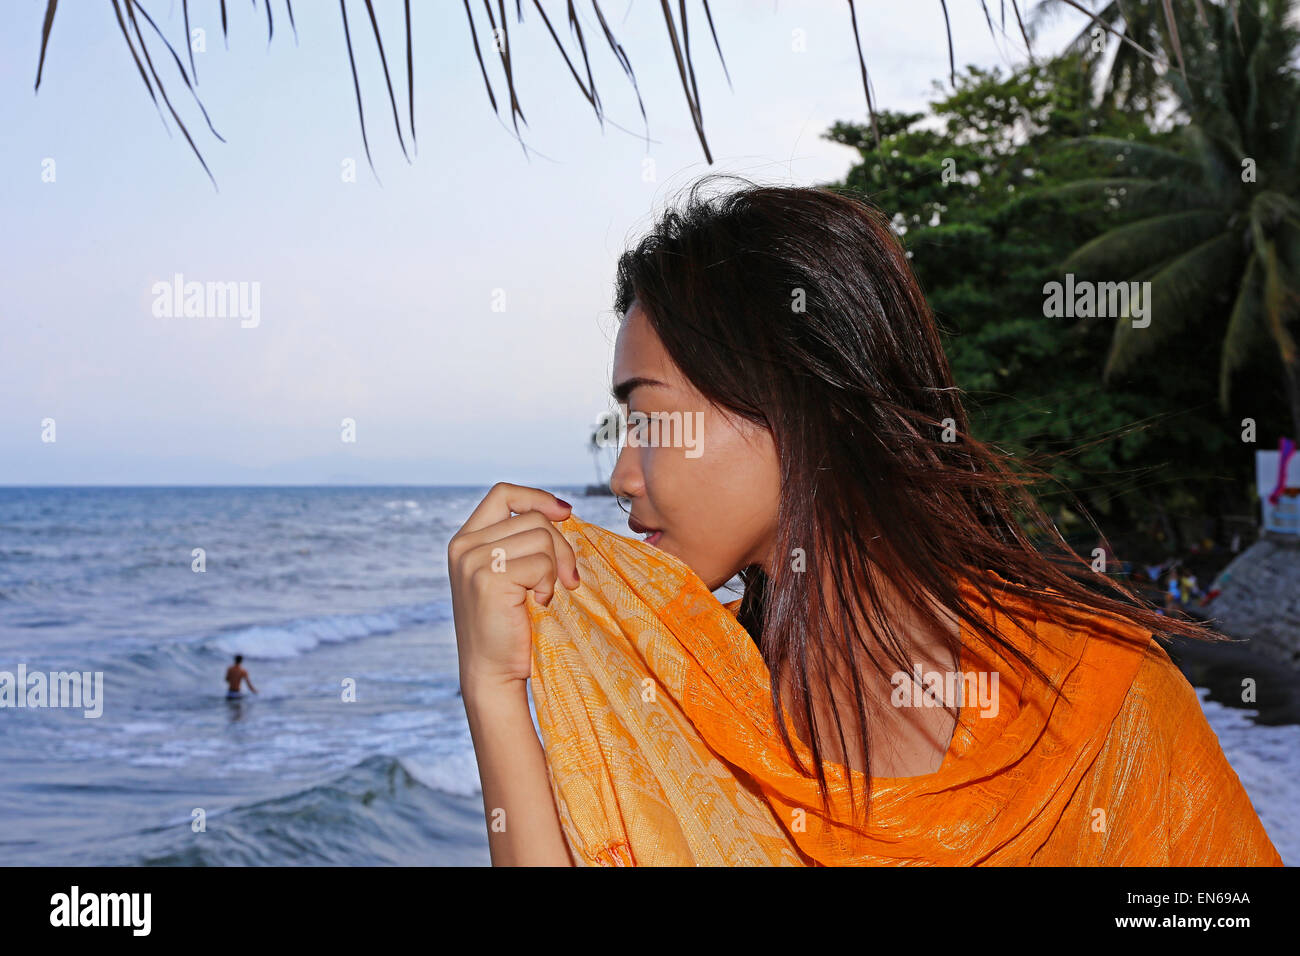 Young woman looking out over the sea in the Philippines Stock Photo